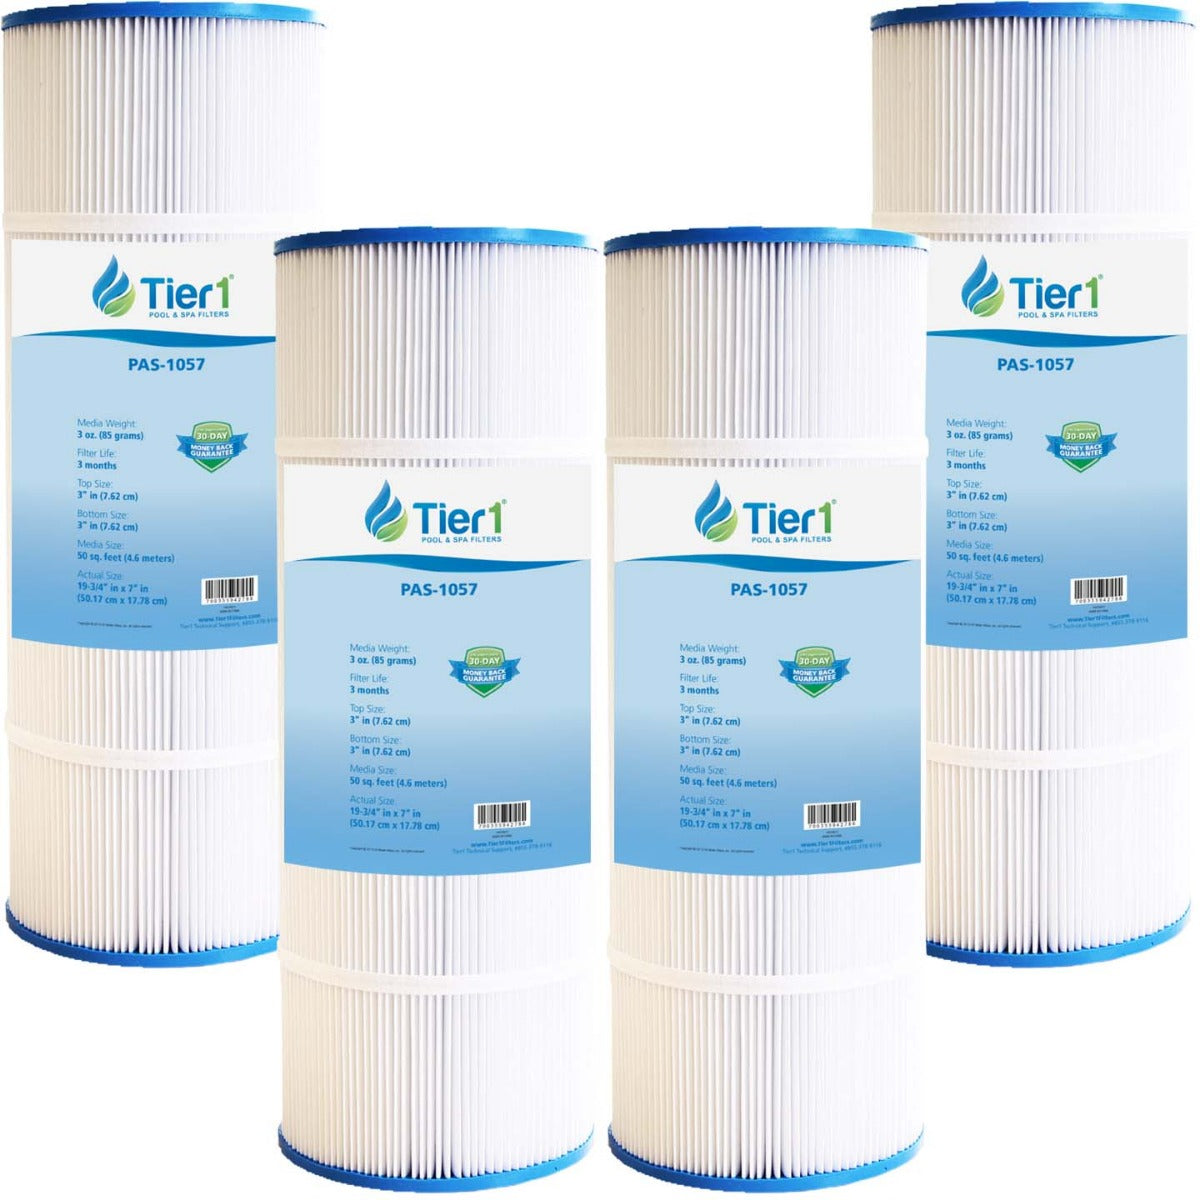 Tier1 Brand Replacement Pool and Spa Filter for Hayward CX1100-RE